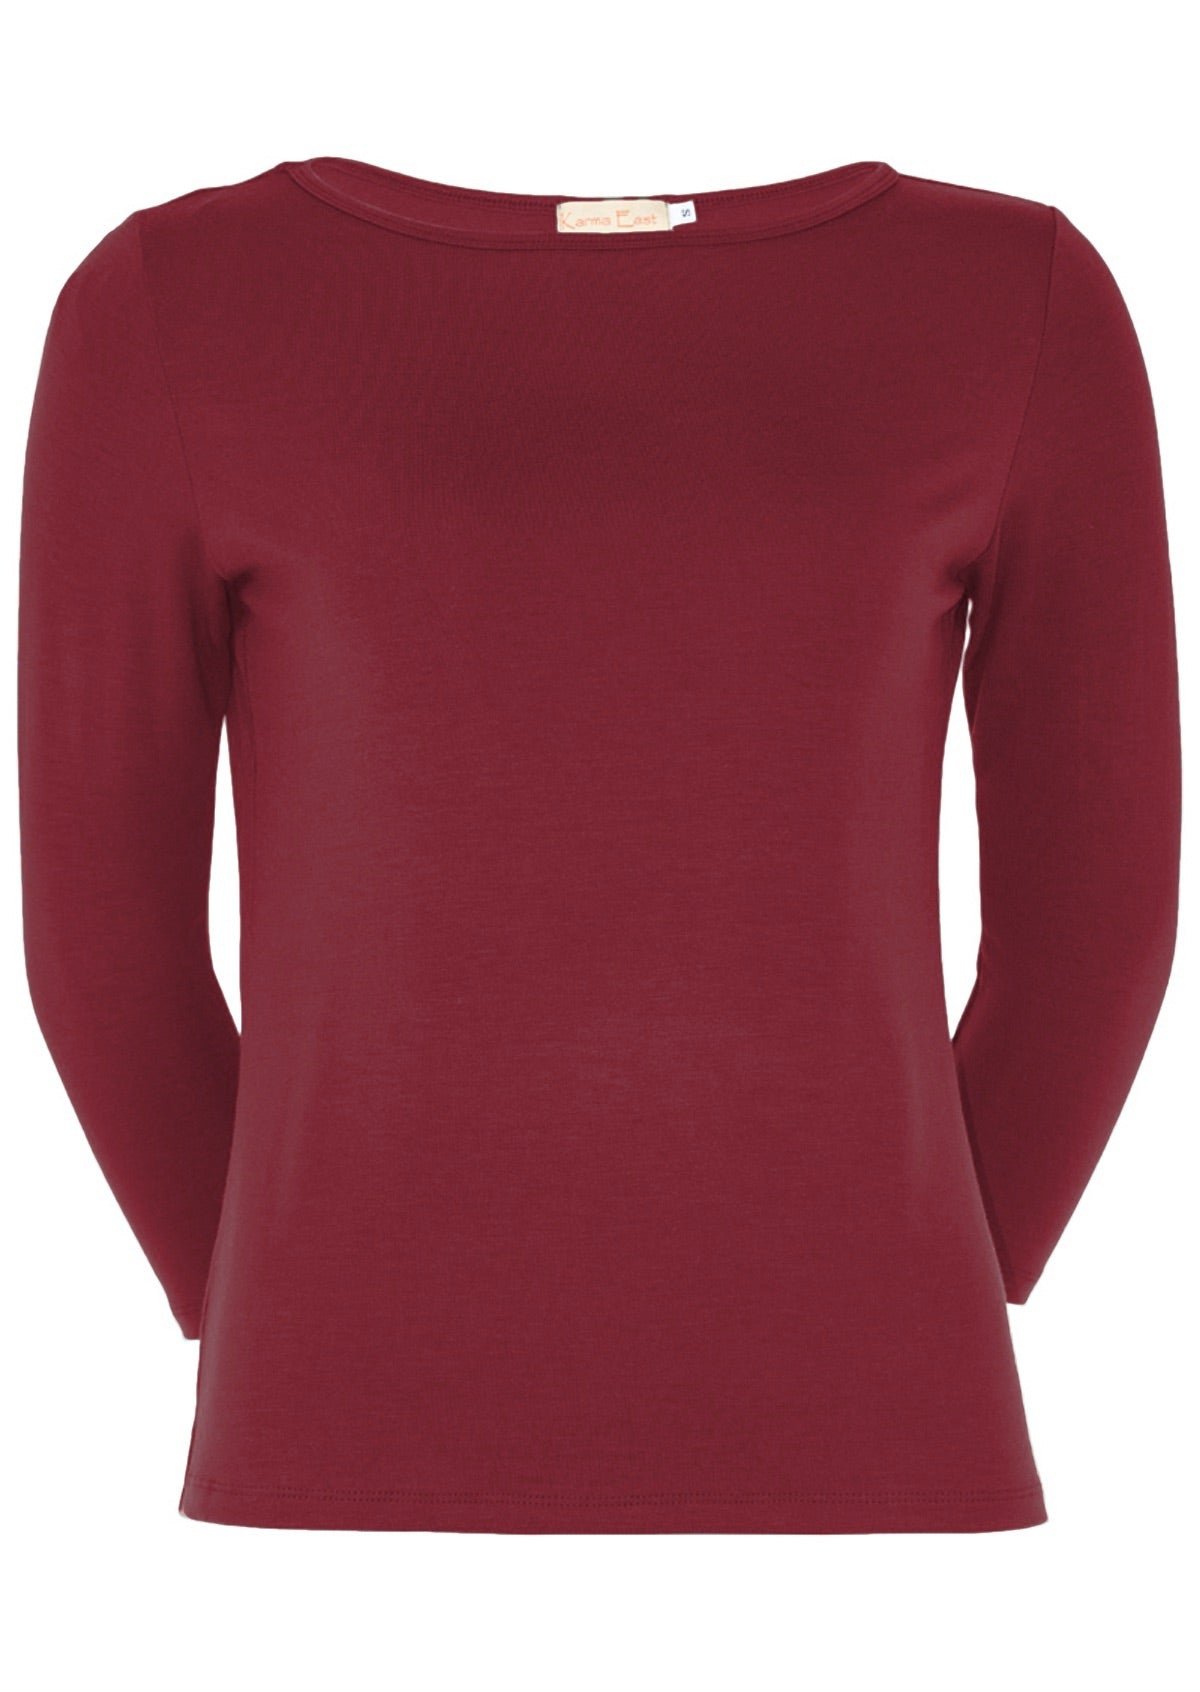 Front view of women's rayon boat neck maroon 3/4 sleeve top.